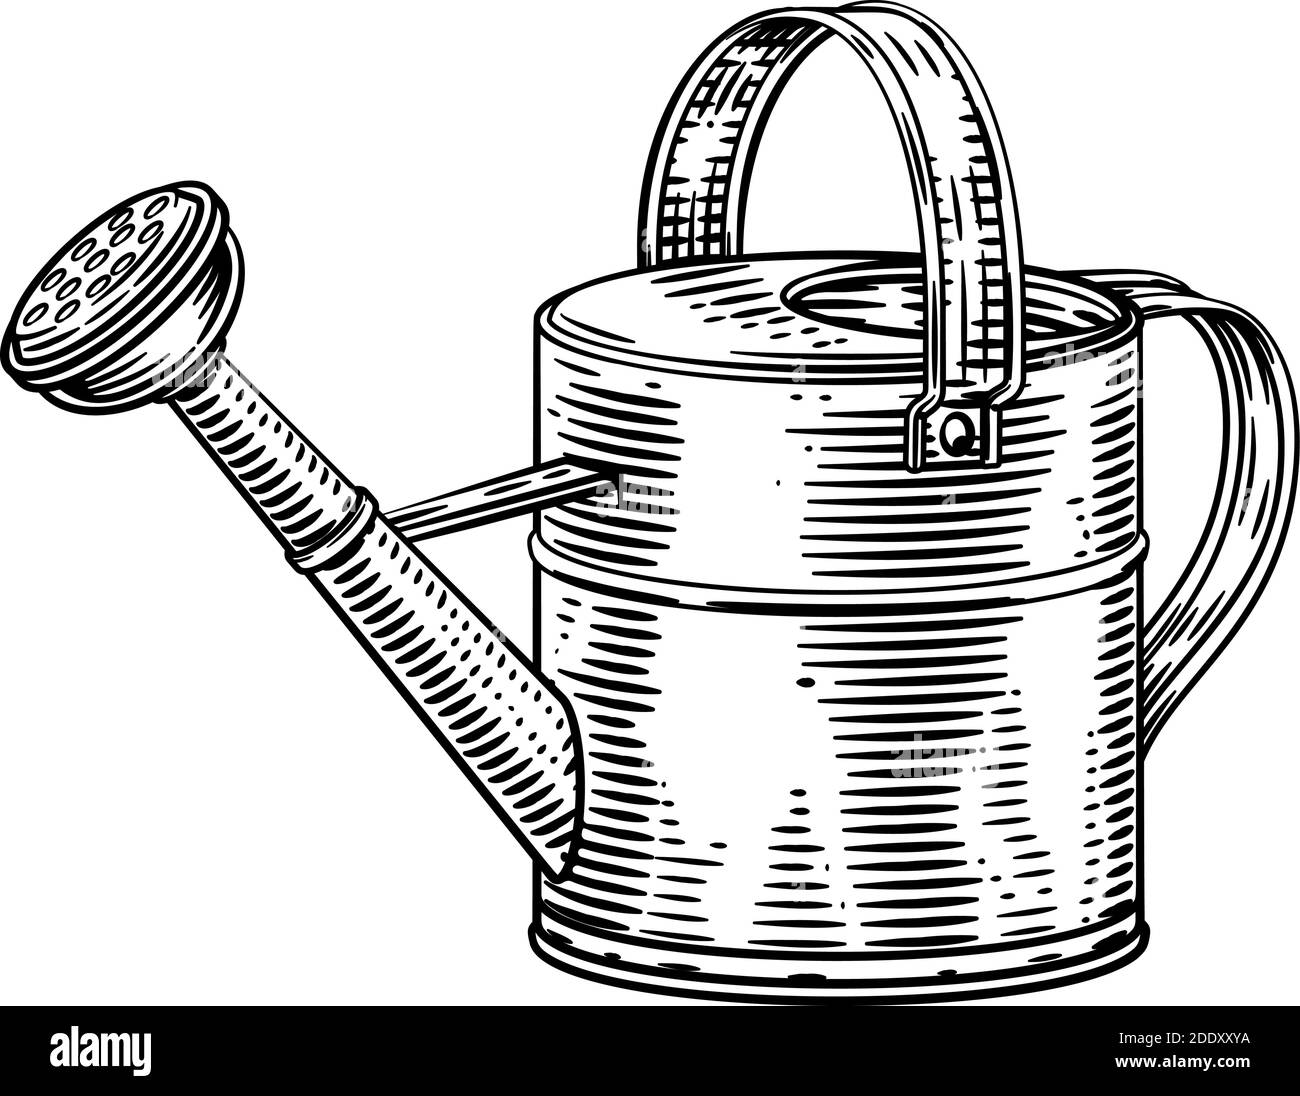 Garden Tool Watering Can Woodcut Vintage Style Stock Vector